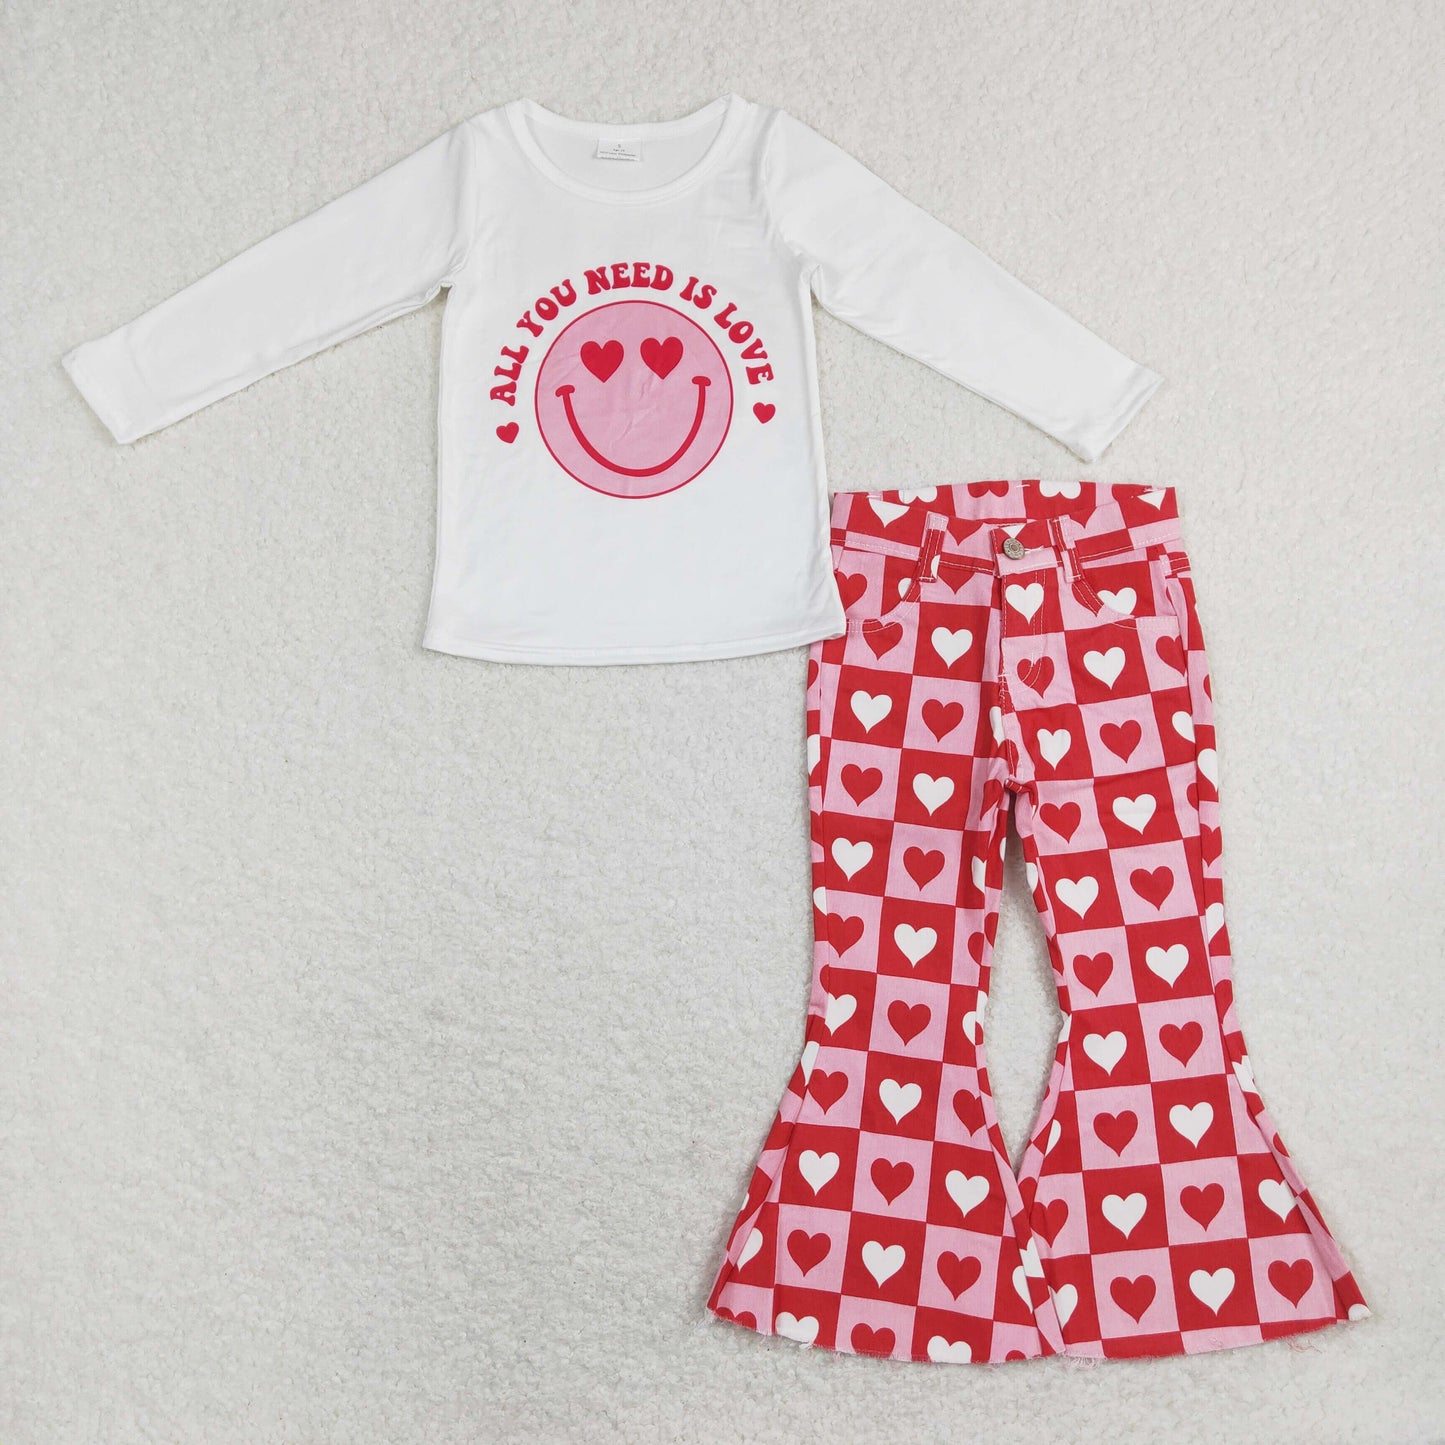 GLP1158 All You Need Is LOVE Smiling Top Heart Denim Bell Bottom Jeans Girls Valentine's Clothes Set